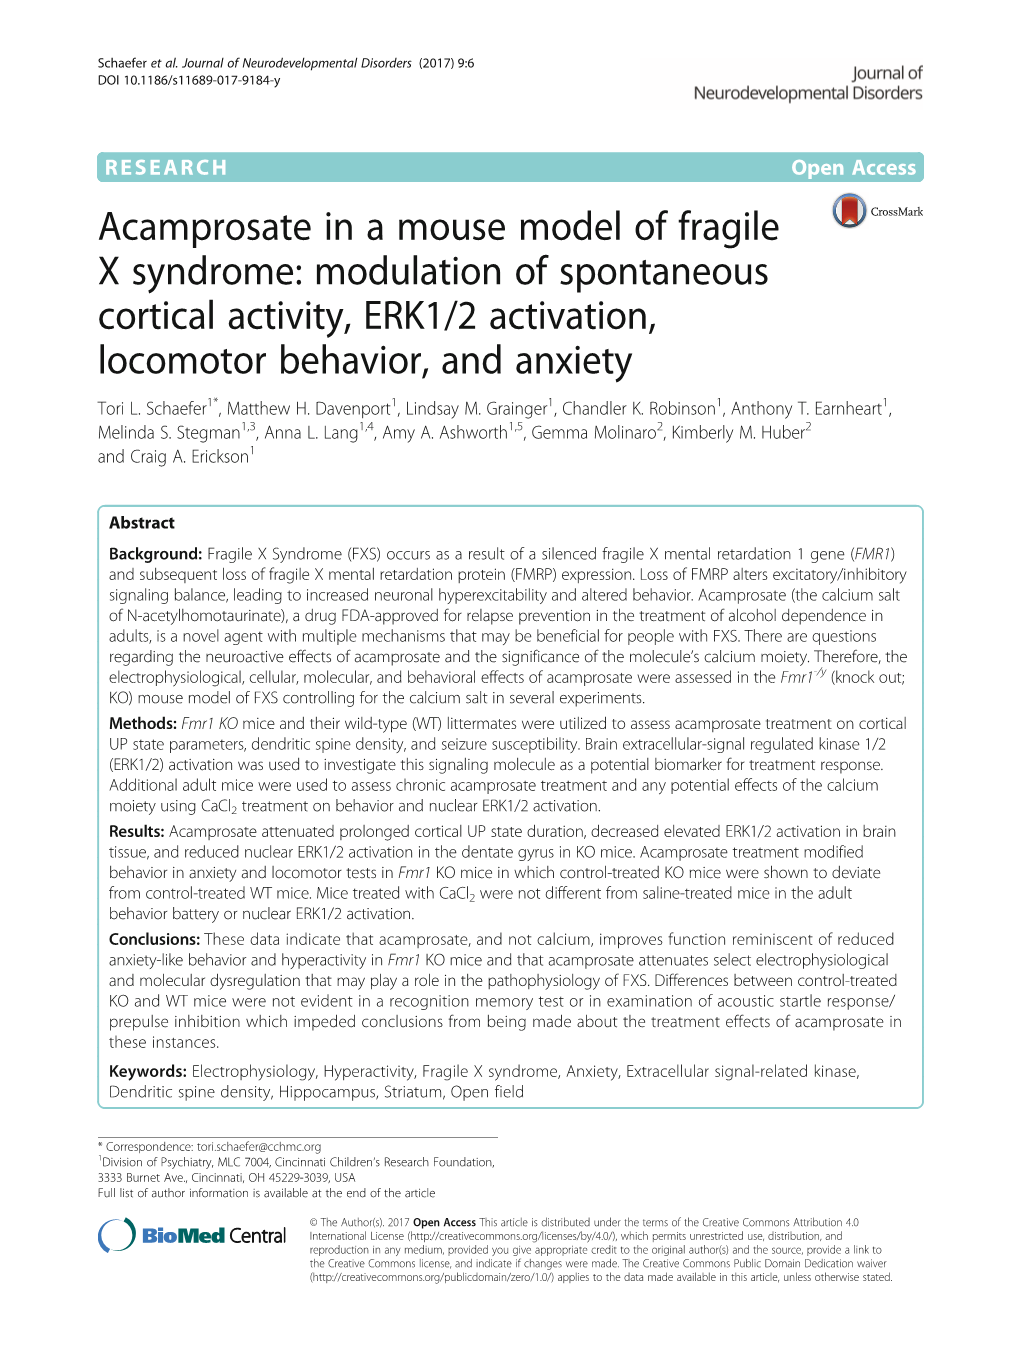 Acamprosate in a Mouse Model of Fragile X Syndrome: Modulation of Spontaneous Cortical Activity, ERK1/2 Activation, Locomotor Behavior, and Anxiety Tori L